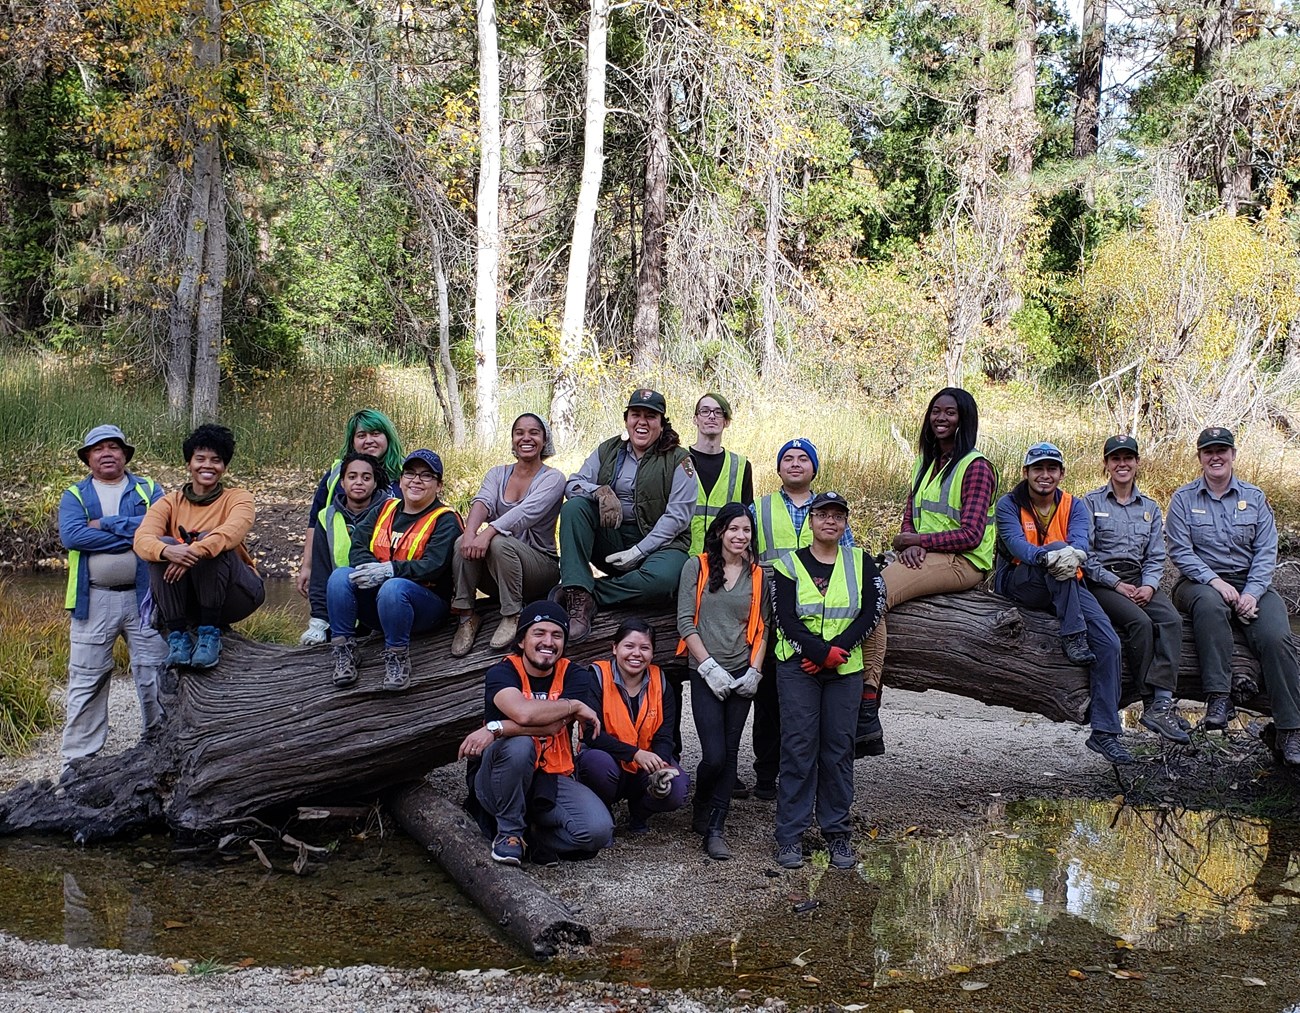 Participants in We.R.More, a workshop for ethnic and racial minorities in outdoor rec, pose on a large horizontal log in a shallow creek.